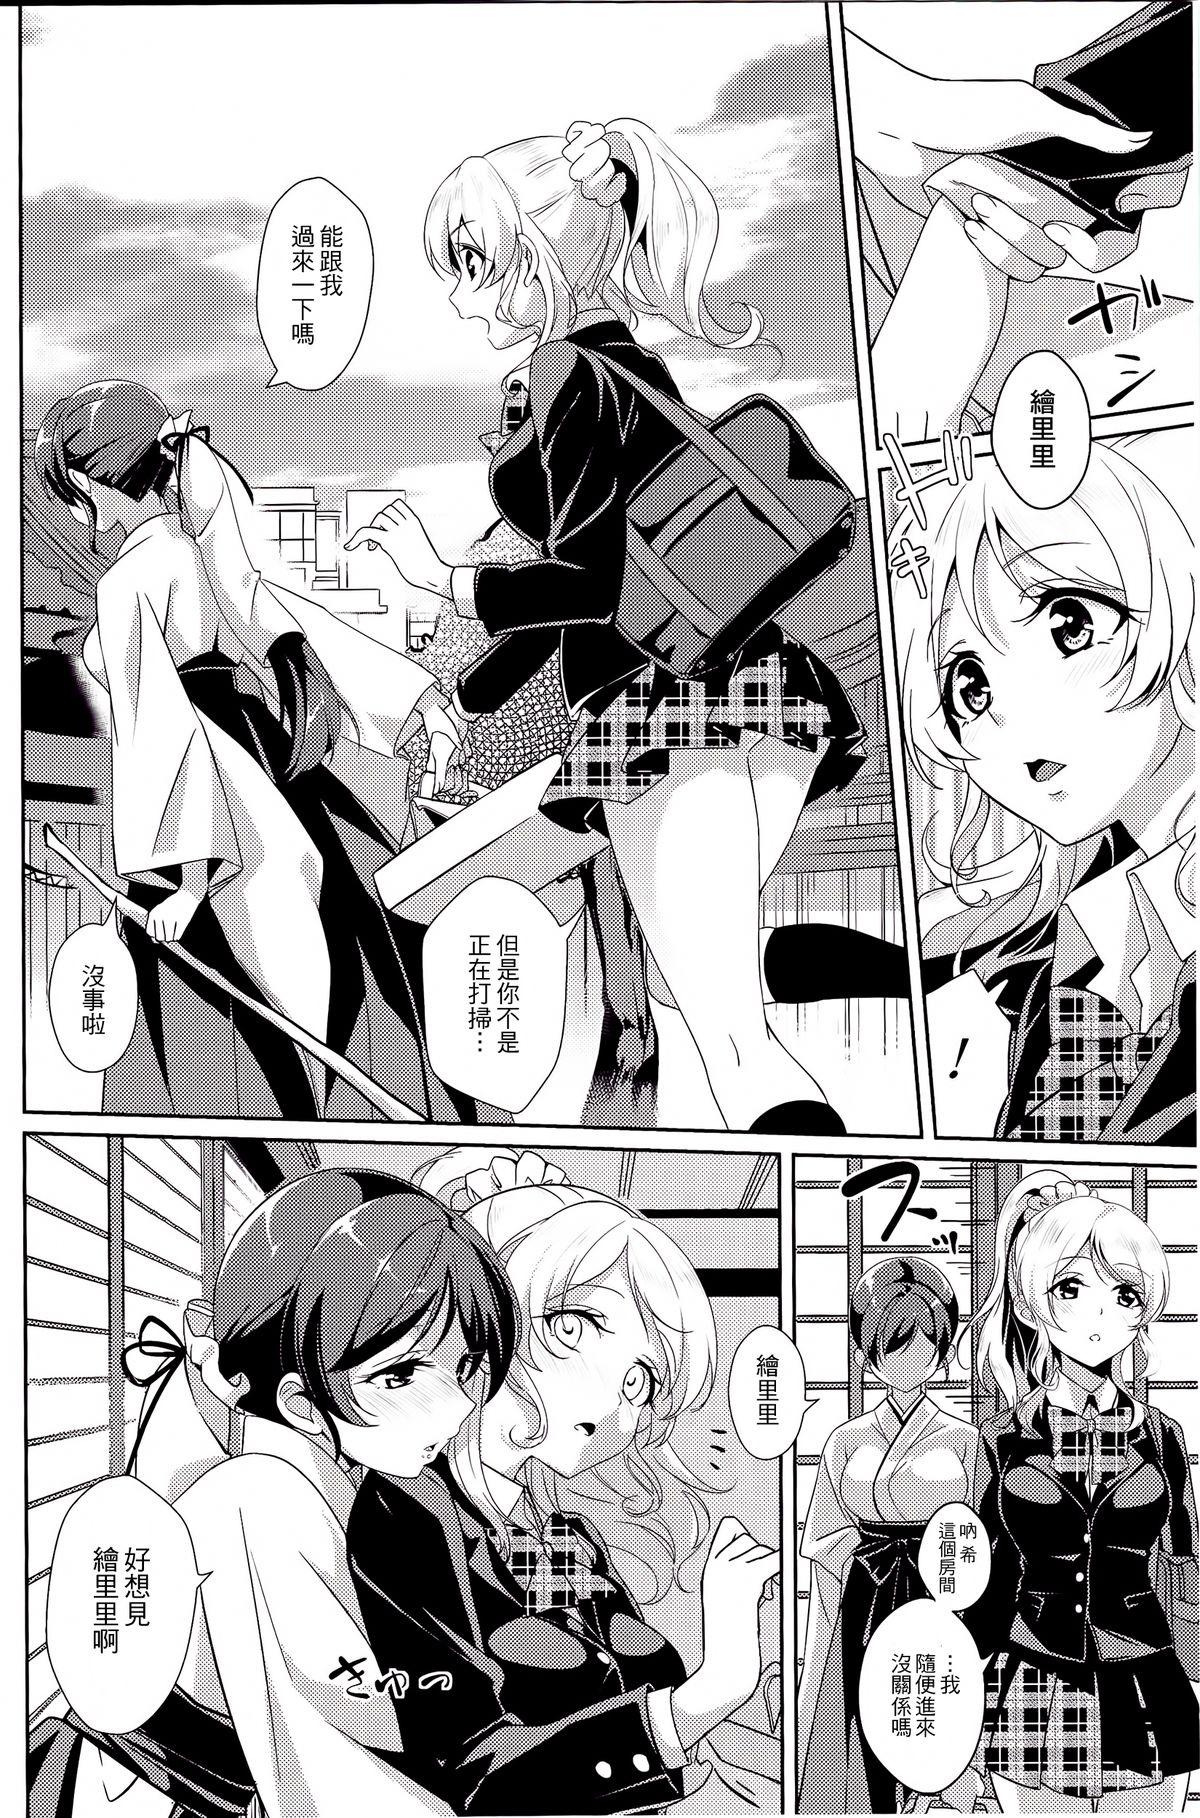 Hot Blow Jobs Dear Secrets - Love live Gay Military - Page 6